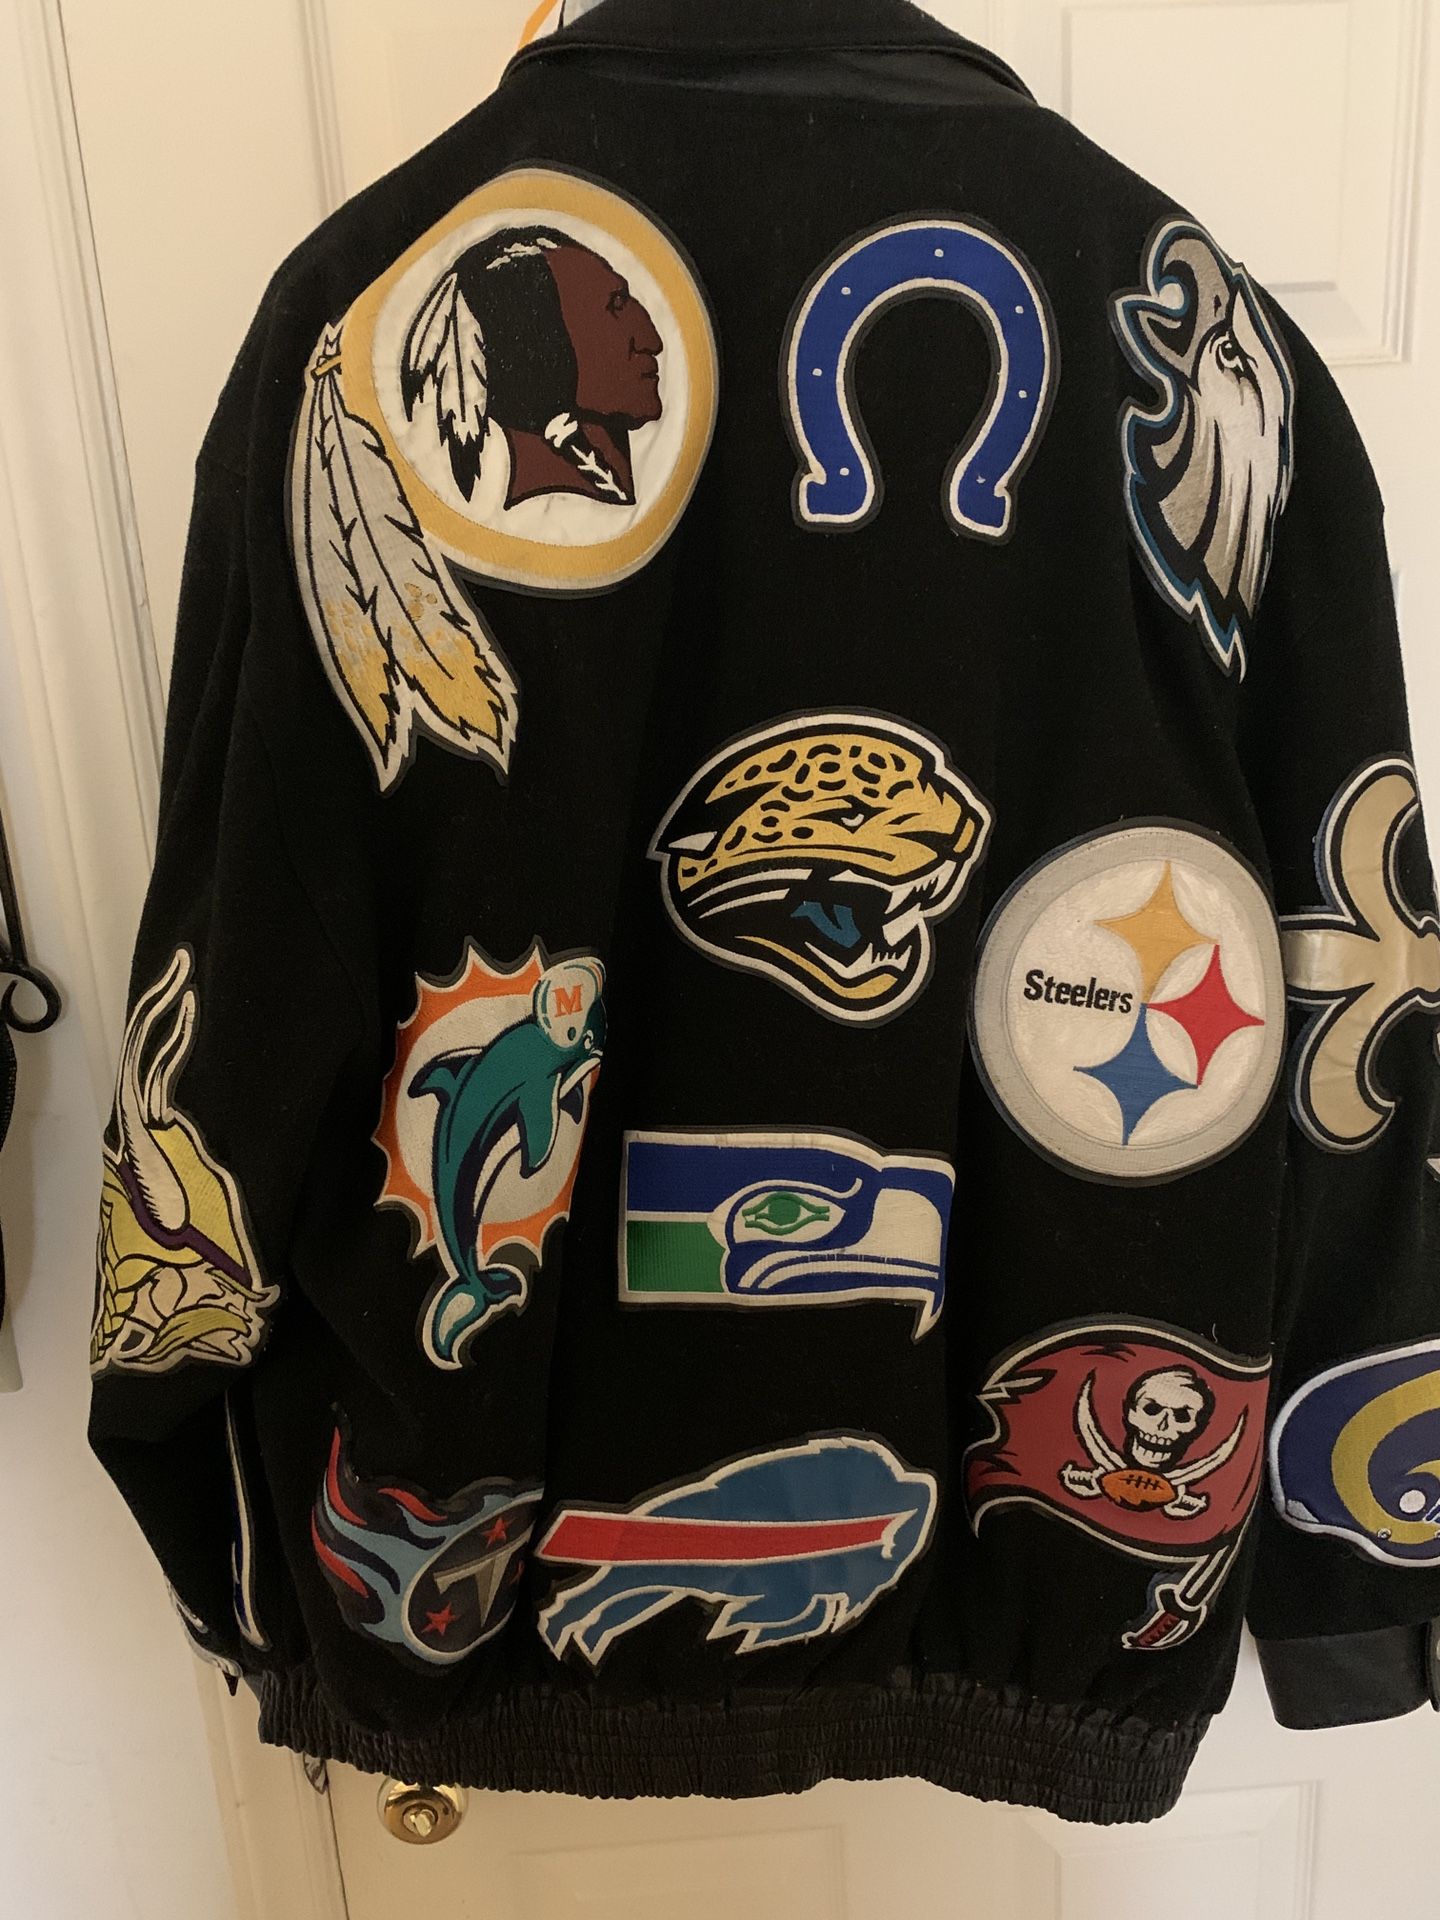 All NFL Jacket  For Sale - First Come First Serve